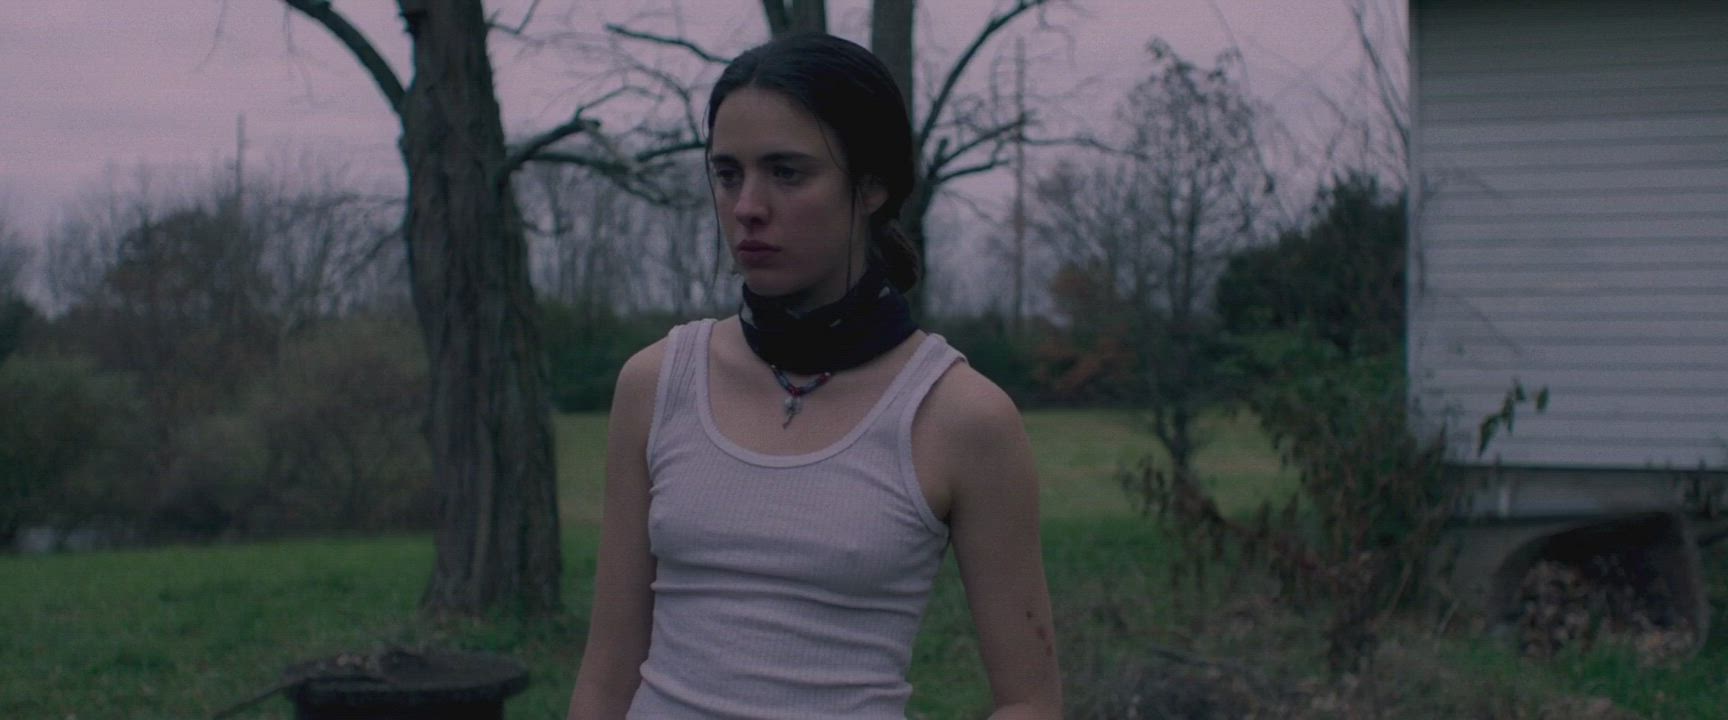 Dipping in the river (Margaret Qualley - Donnybrook (US2018))